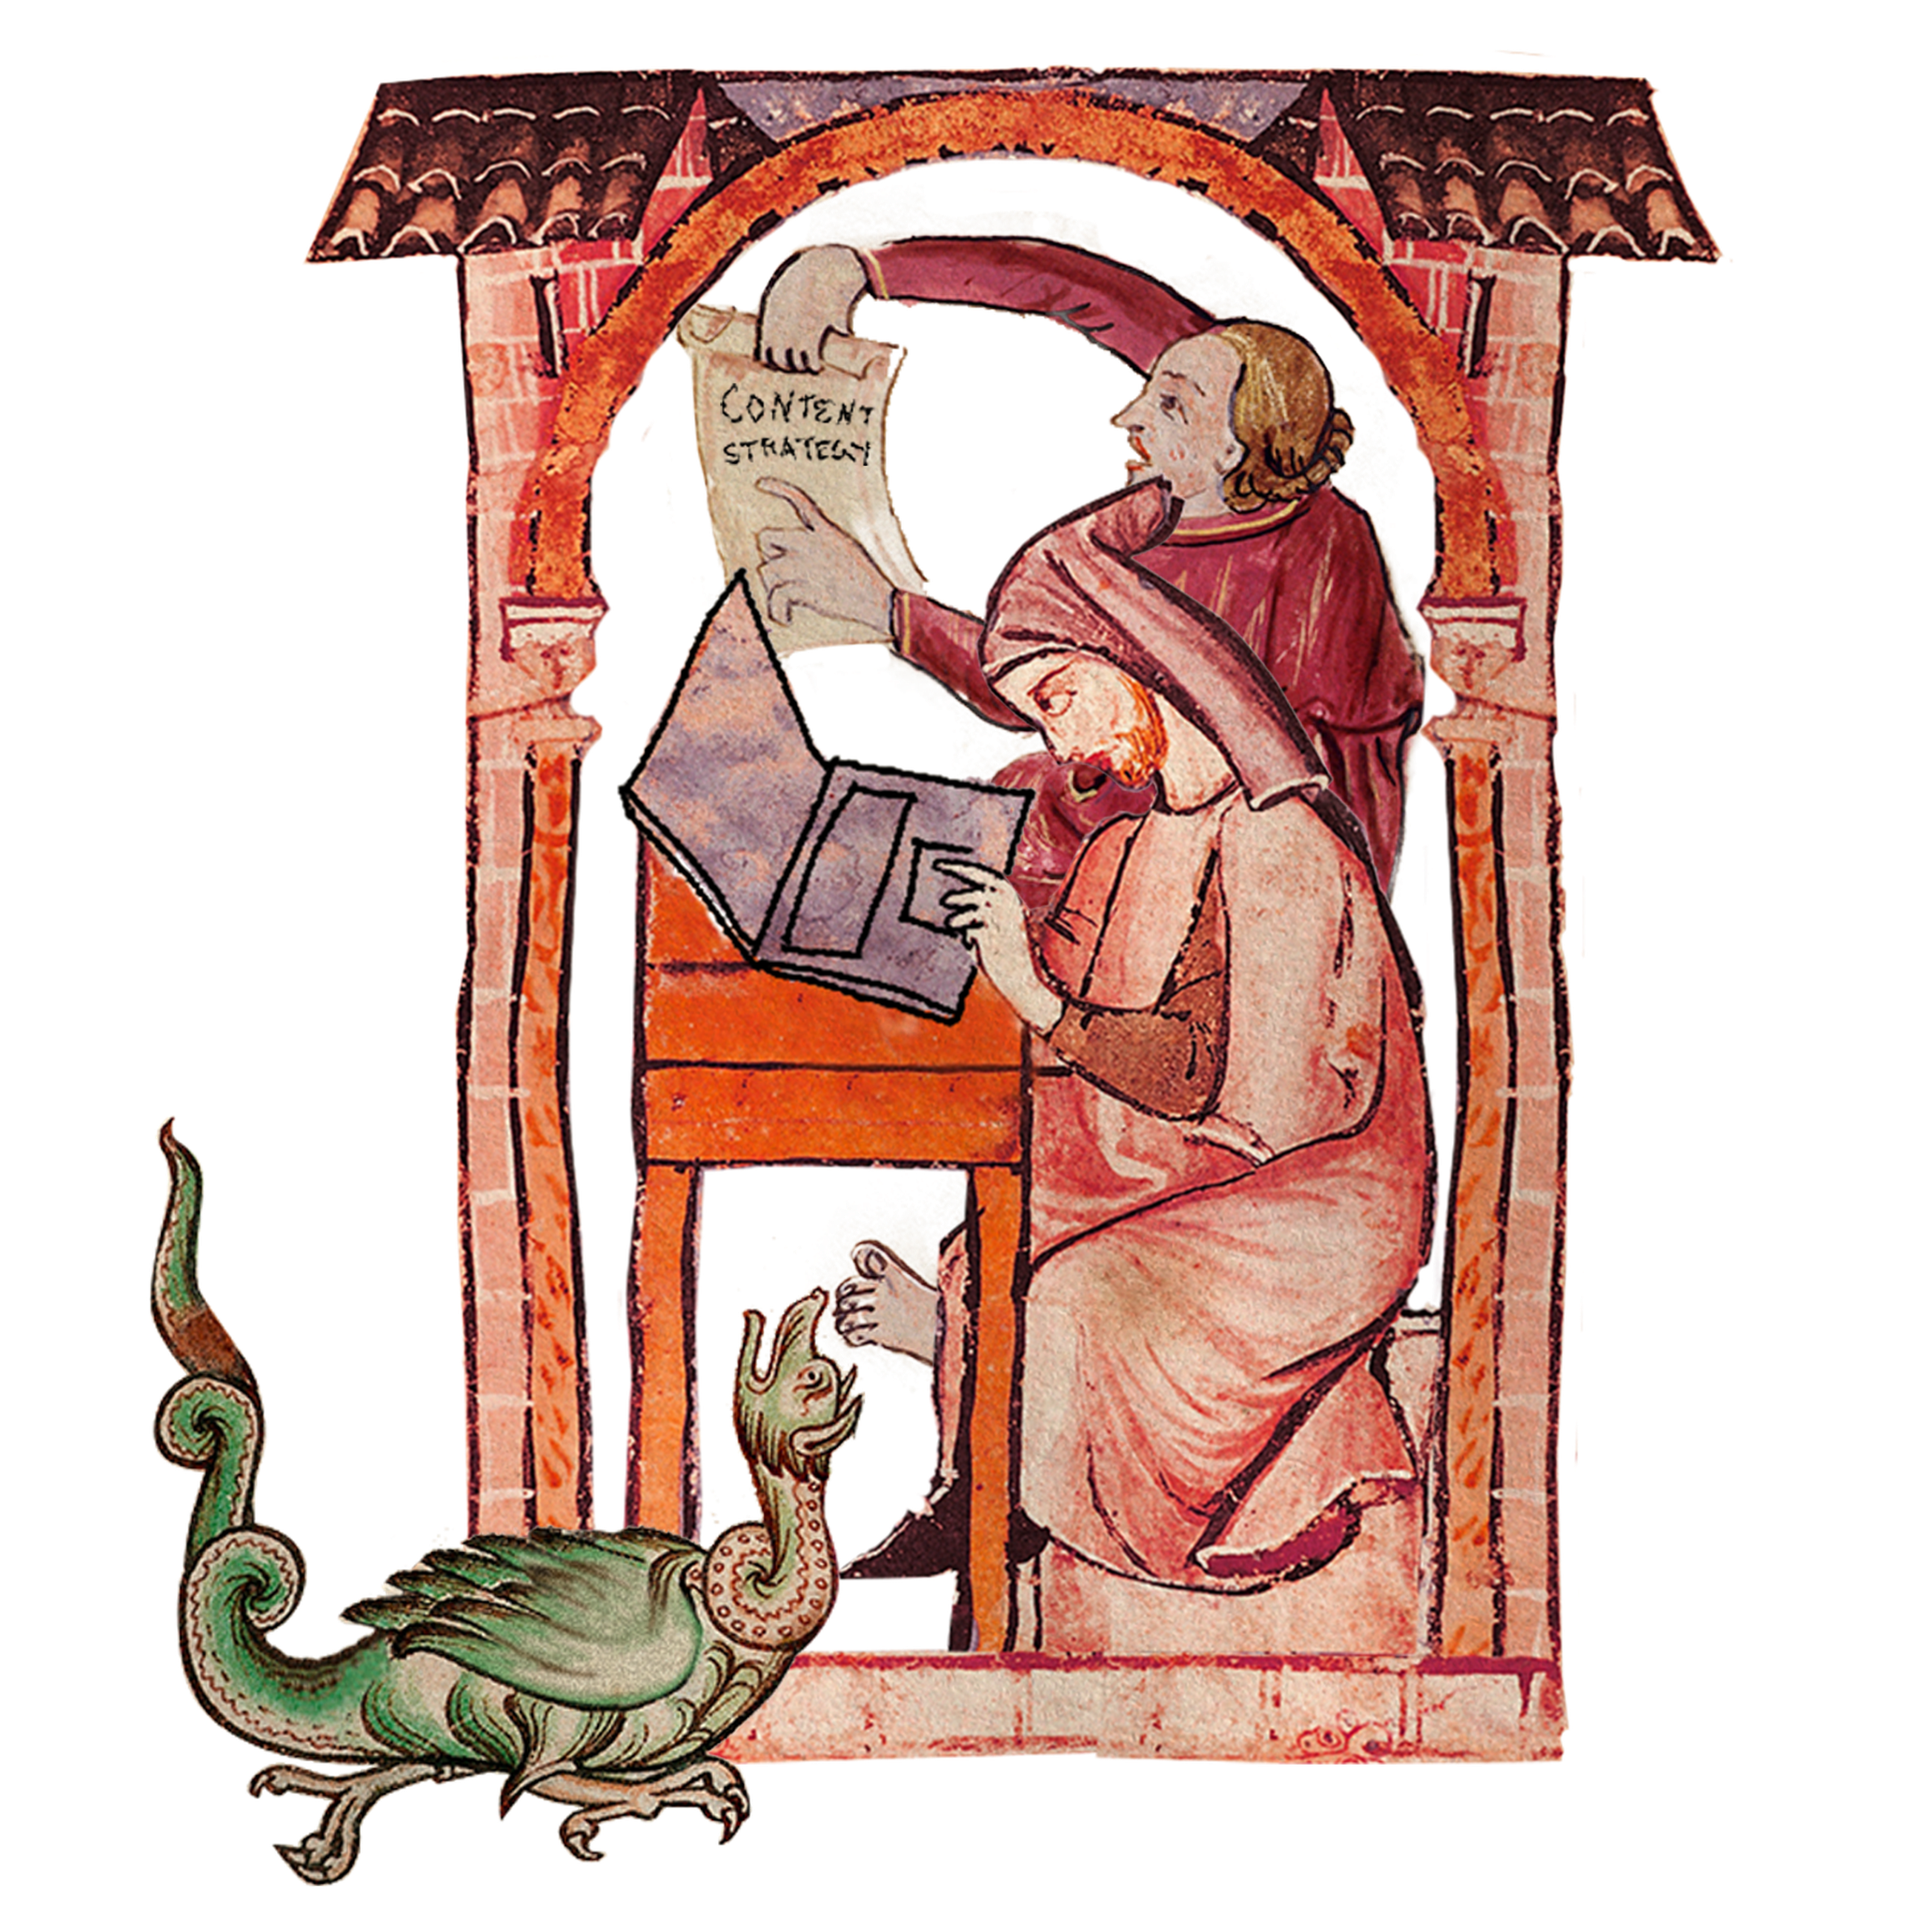 A drawing of medieval monk typing on a laptop. His editor is pointing to a scroll labeled “Content Strategy” and there is a strange creature running by.